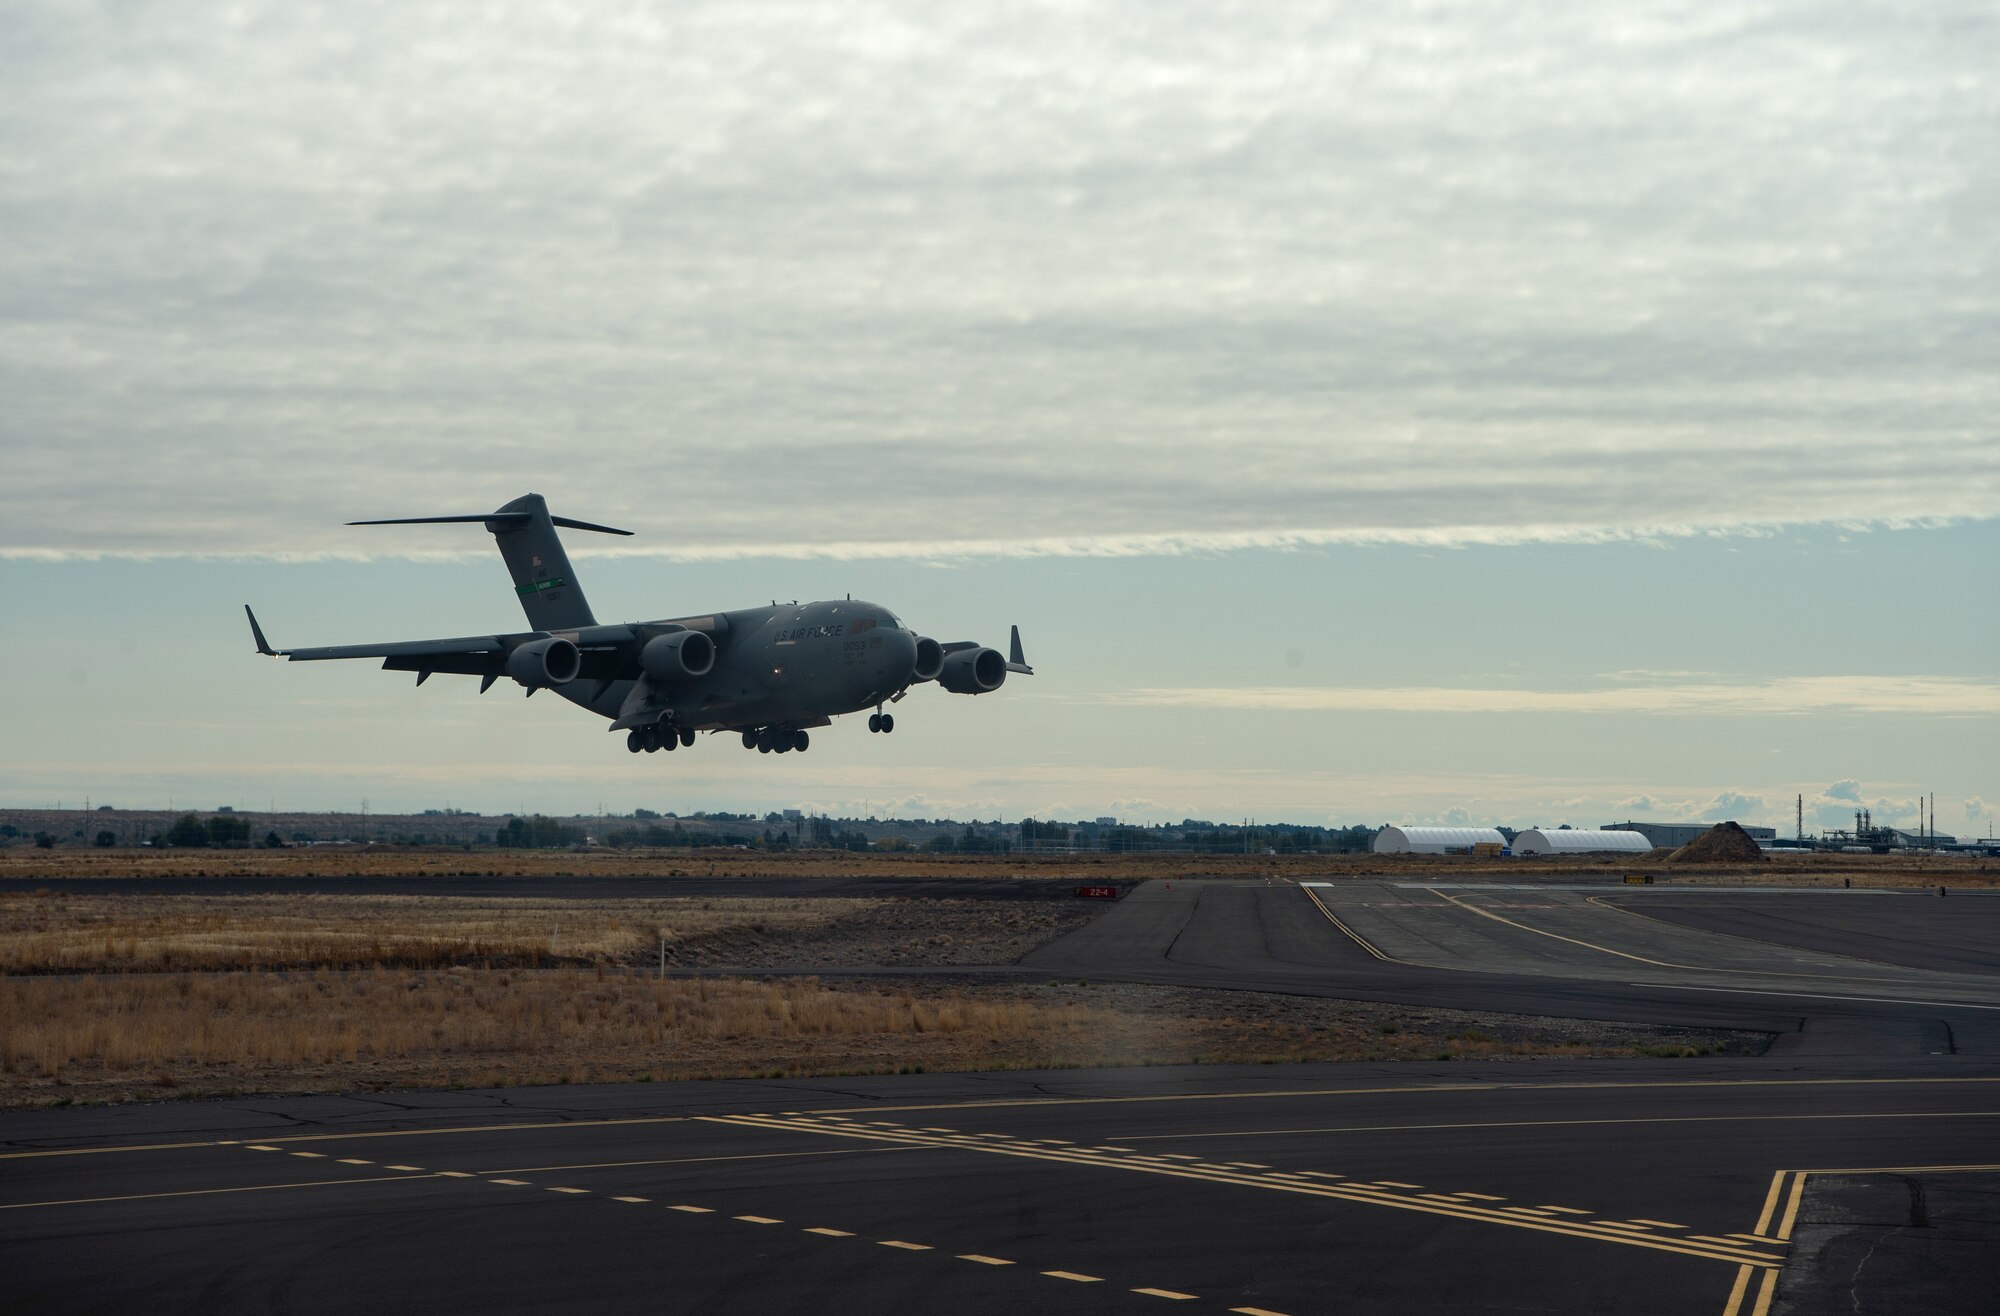 A C-17 Globemaster III comes in to land at Moses Lake Municipal Airport, Wash., Oct. 1, 2019. Two C-17s from McChord Field flew to Moses Lake to train Air Force pilots on a variety of aircraft landings and for Army Soldiers to test their long-range communication equipment. (U.S. Air Force photo by Senior Airman Tryphena Mayhugh)